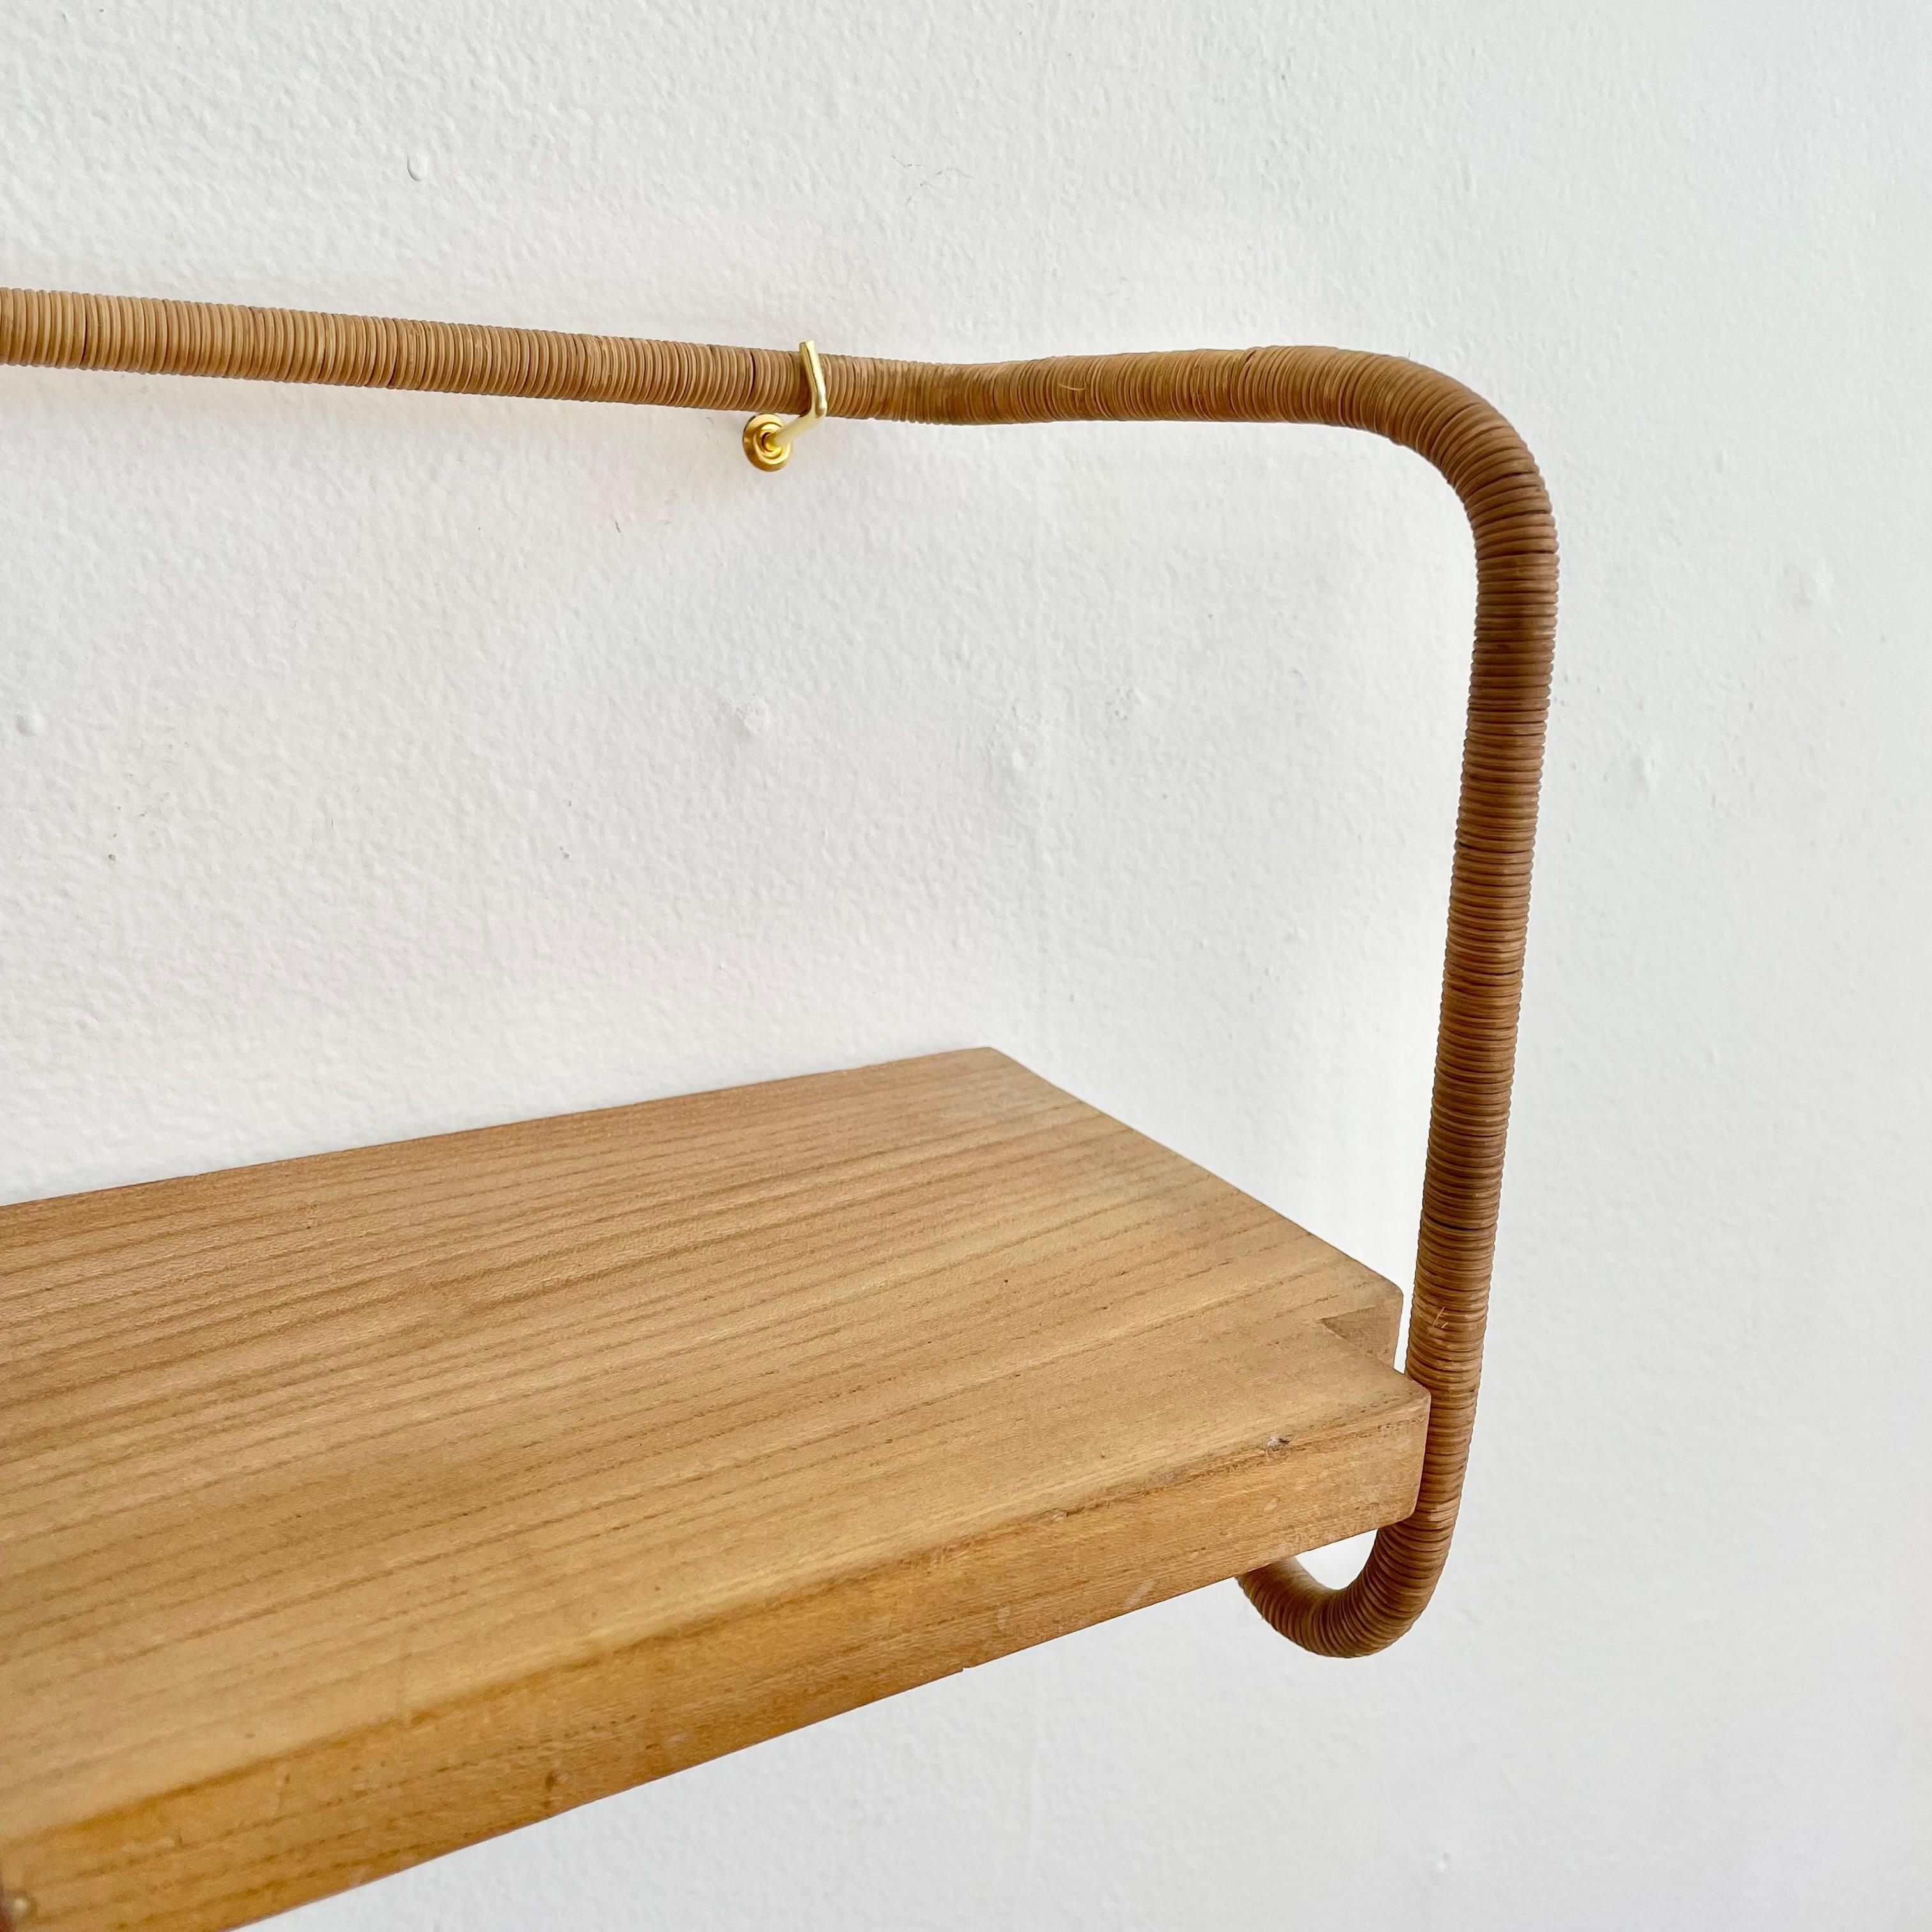 Jacques Adnet Leather, Wood and Twine Shelf, 1950s France For Sale 1